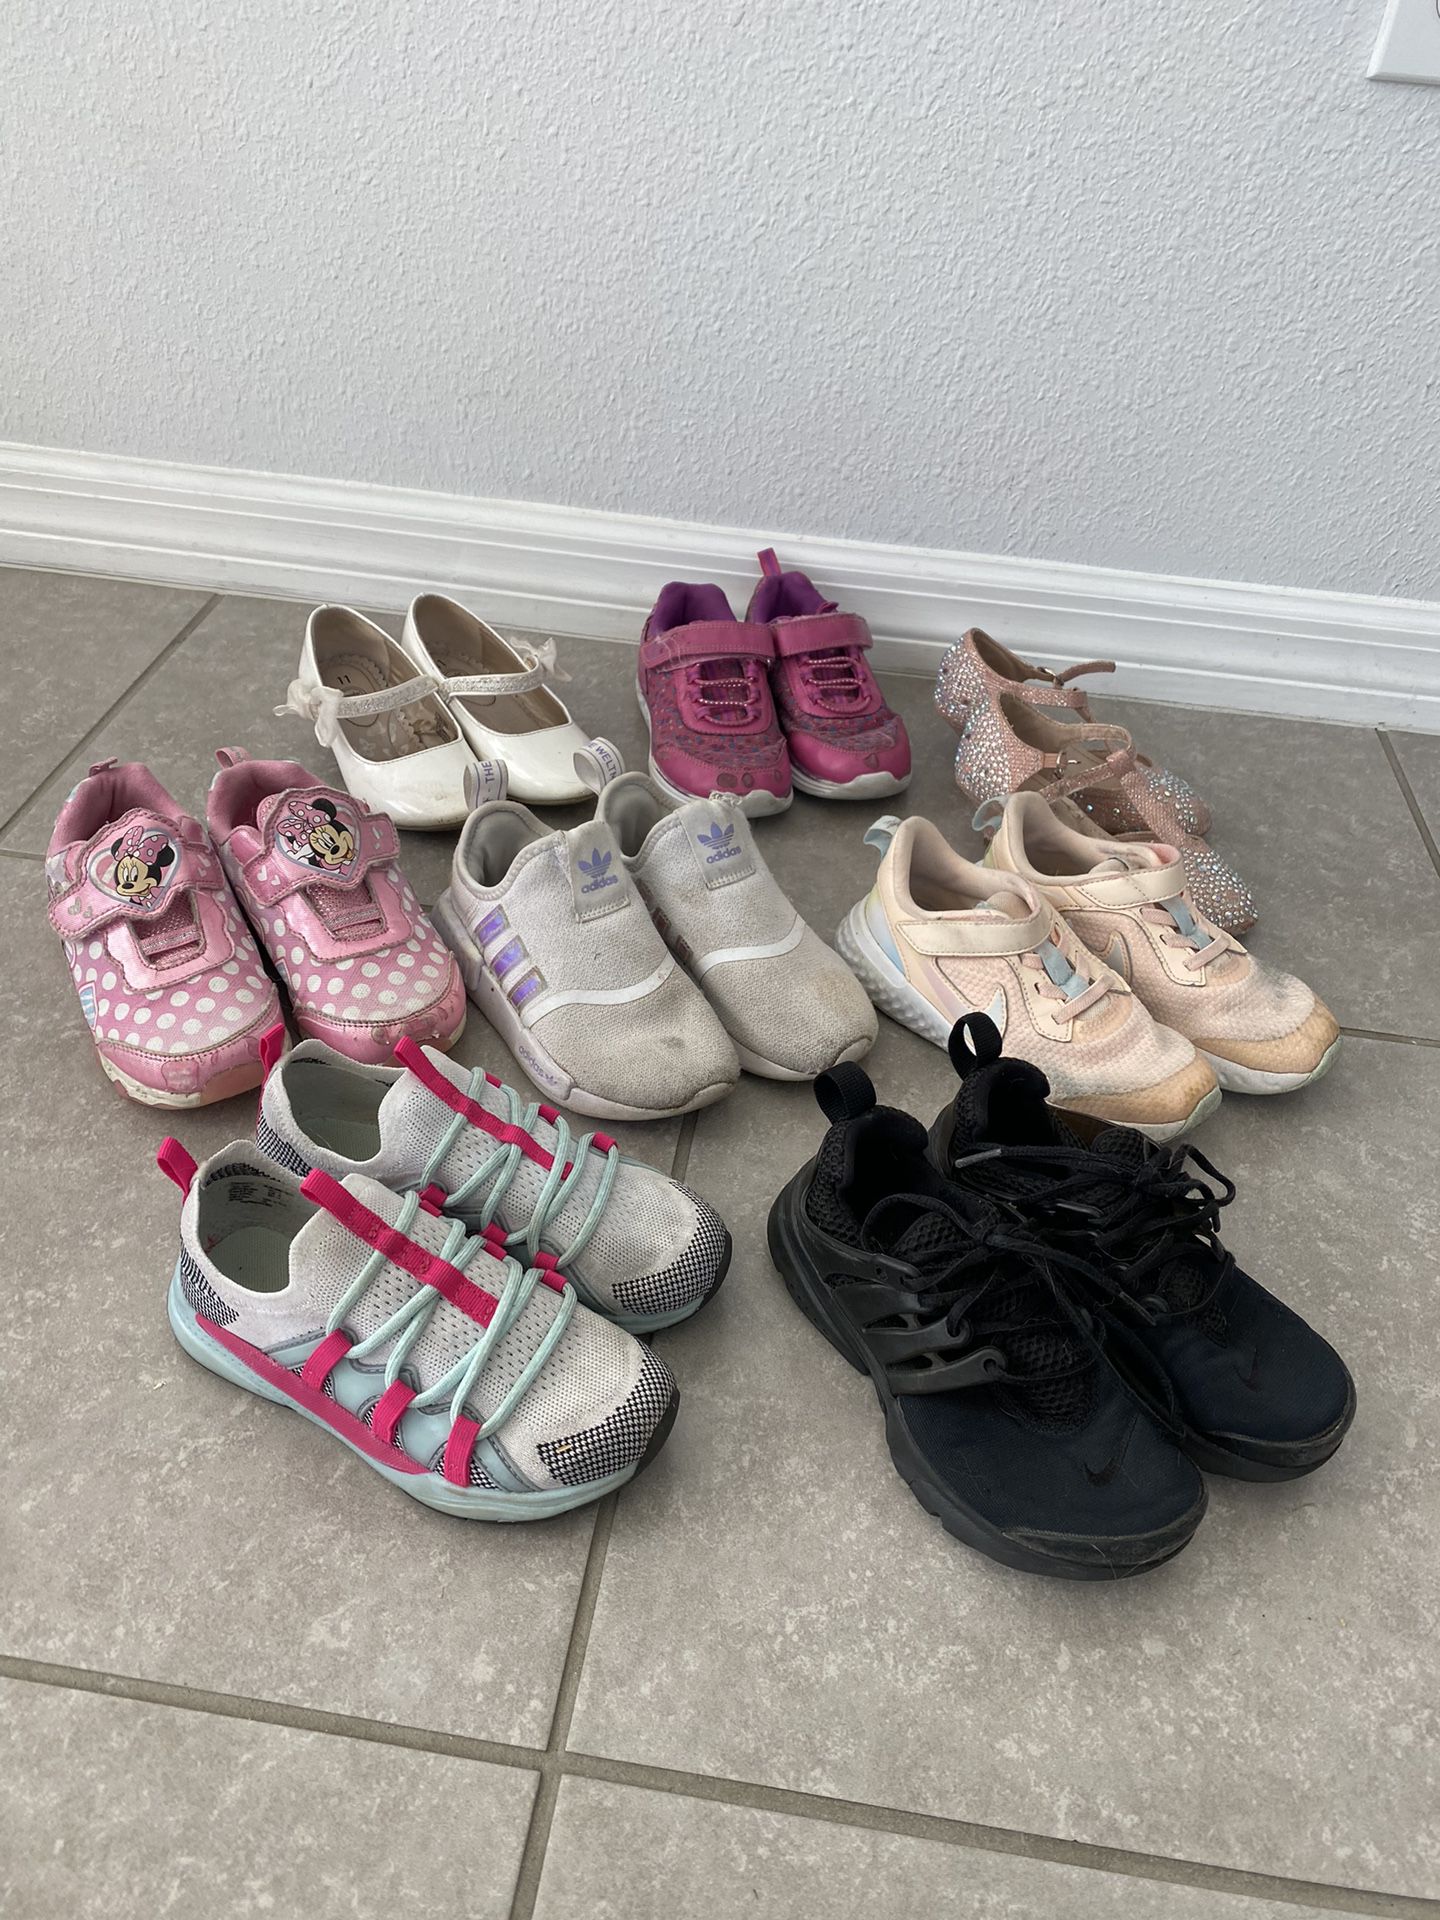 8 pairs size 11 and 12 bundle girl shoes addidas sneakers, nike, minnie mouse $40